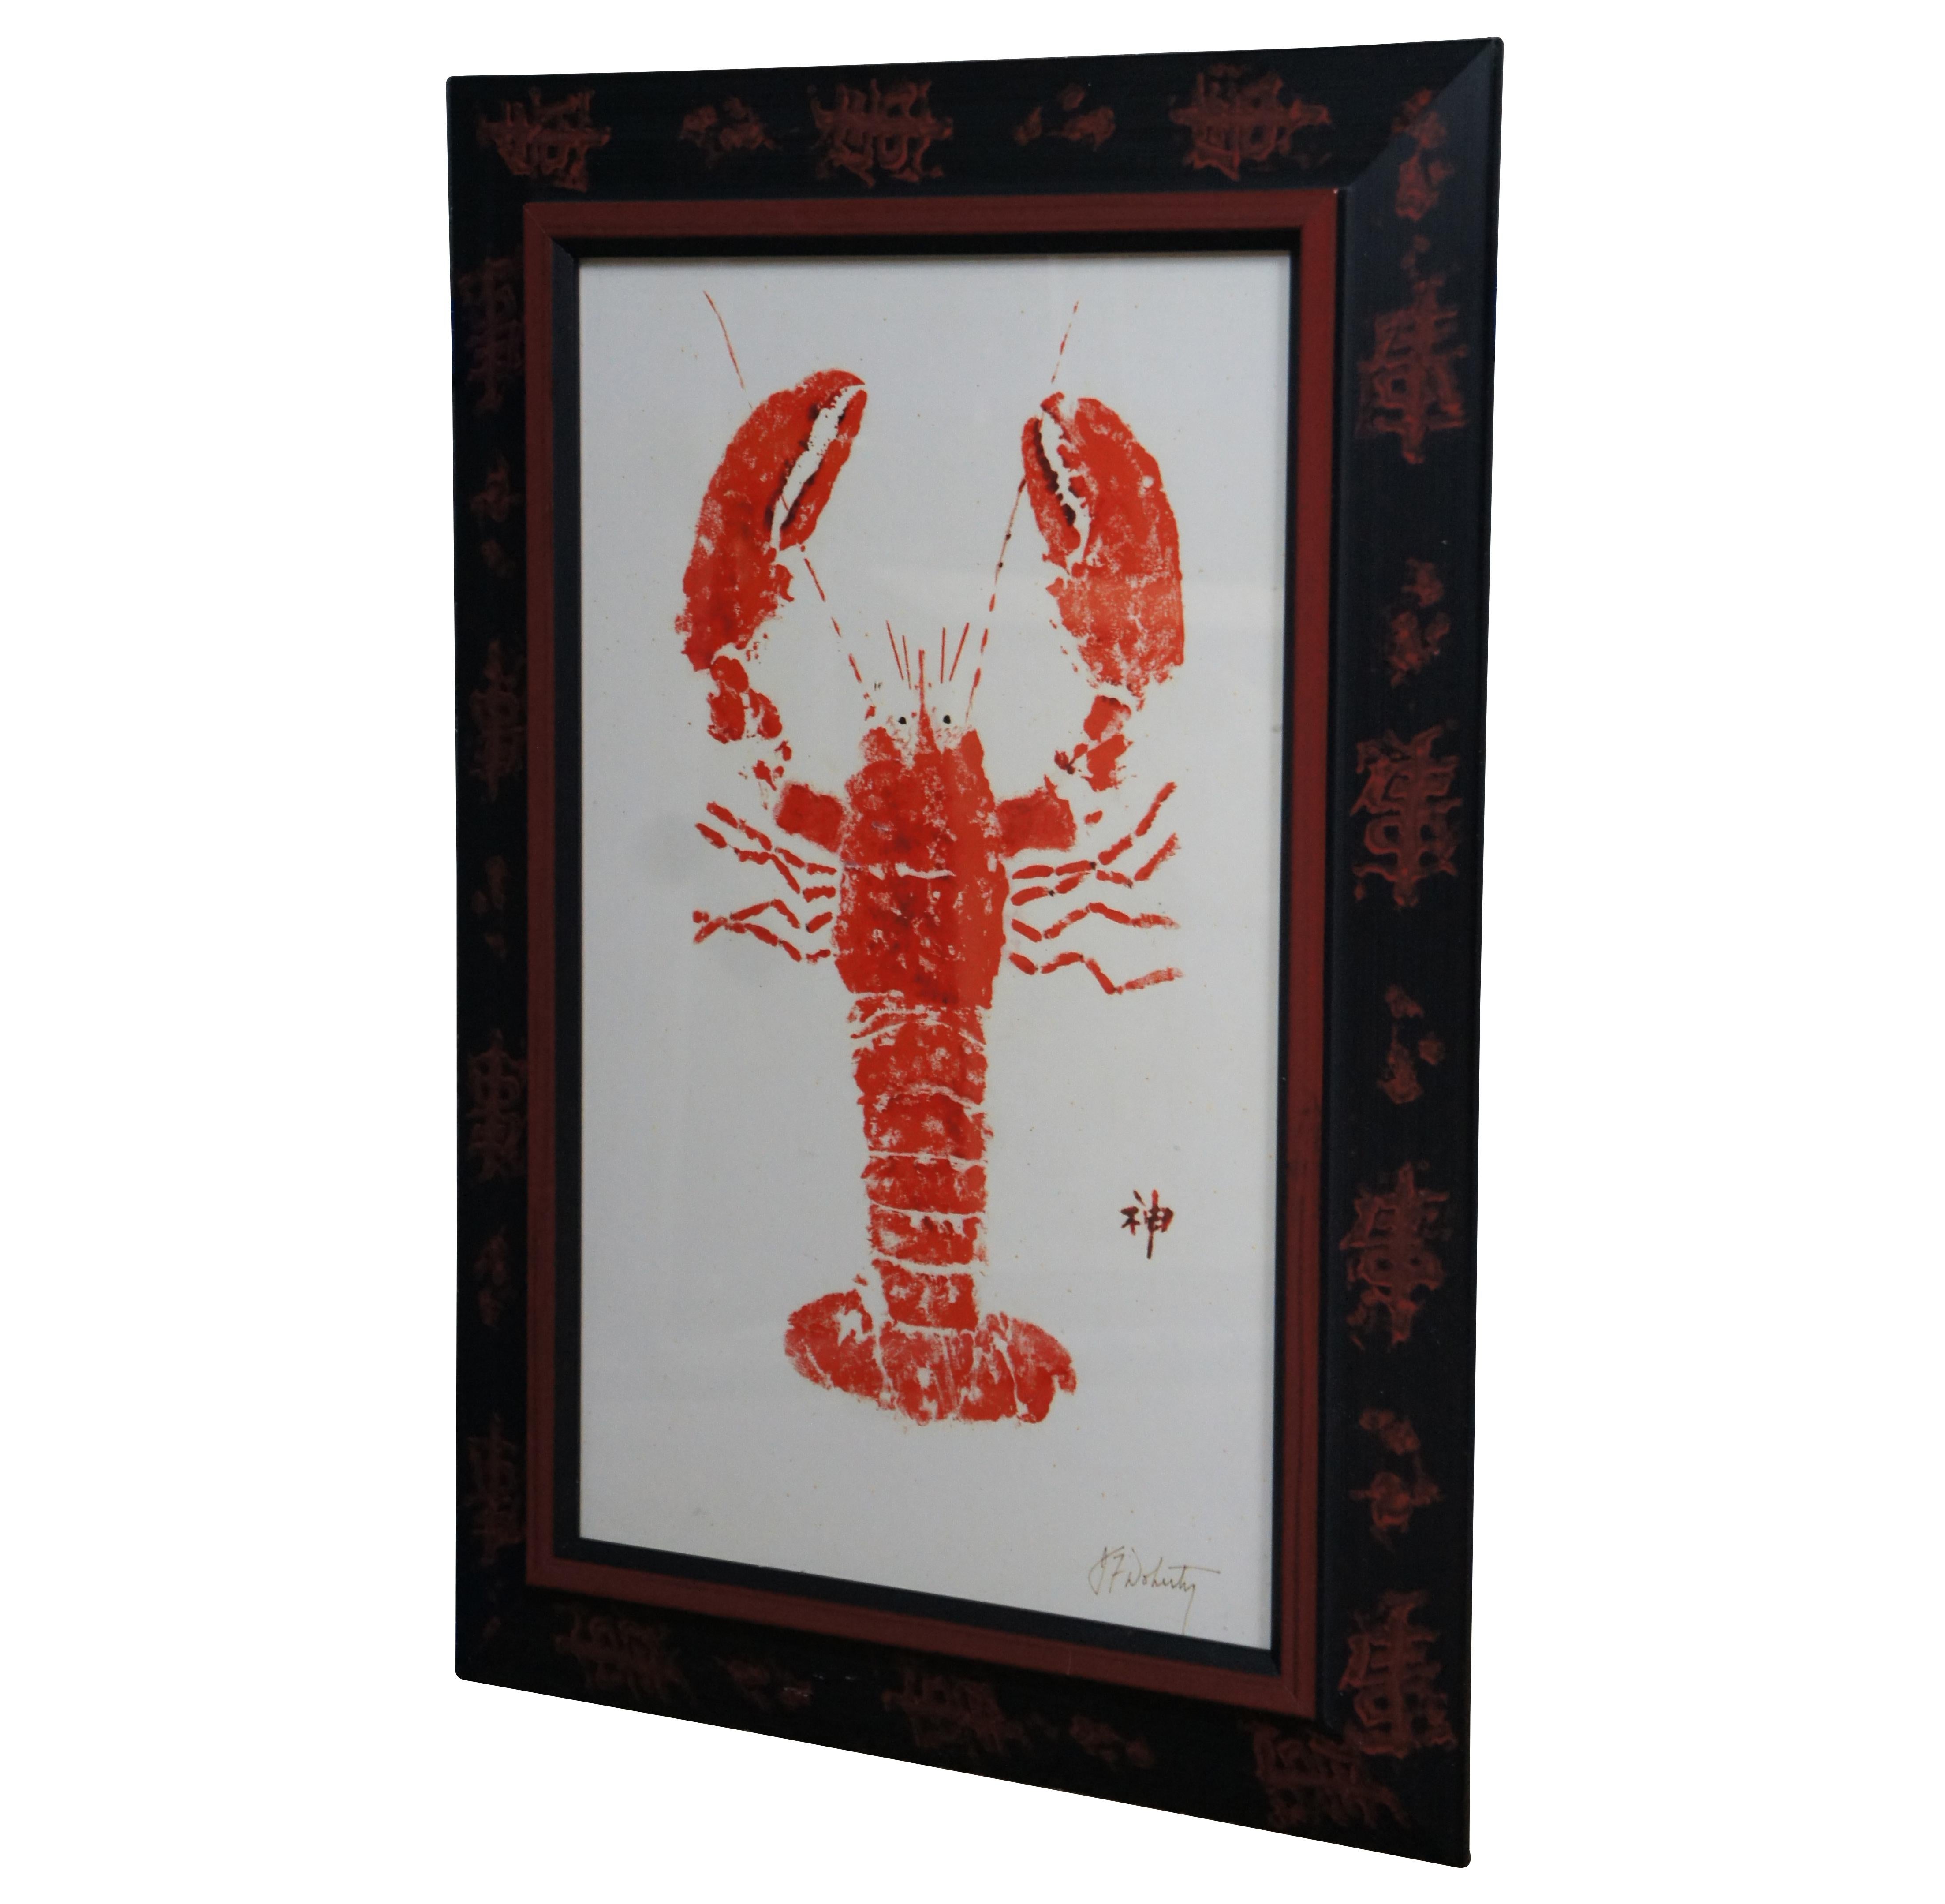 Japanese gyotaku print of a red lobster. Signed in plate by the artist. Originally produced by the FishAye Trading Company, beach theme. Re-framed in black and red with stamped Chinoiserie calligraphy.

Provenance:
Estate of J. Frederic Gagel,